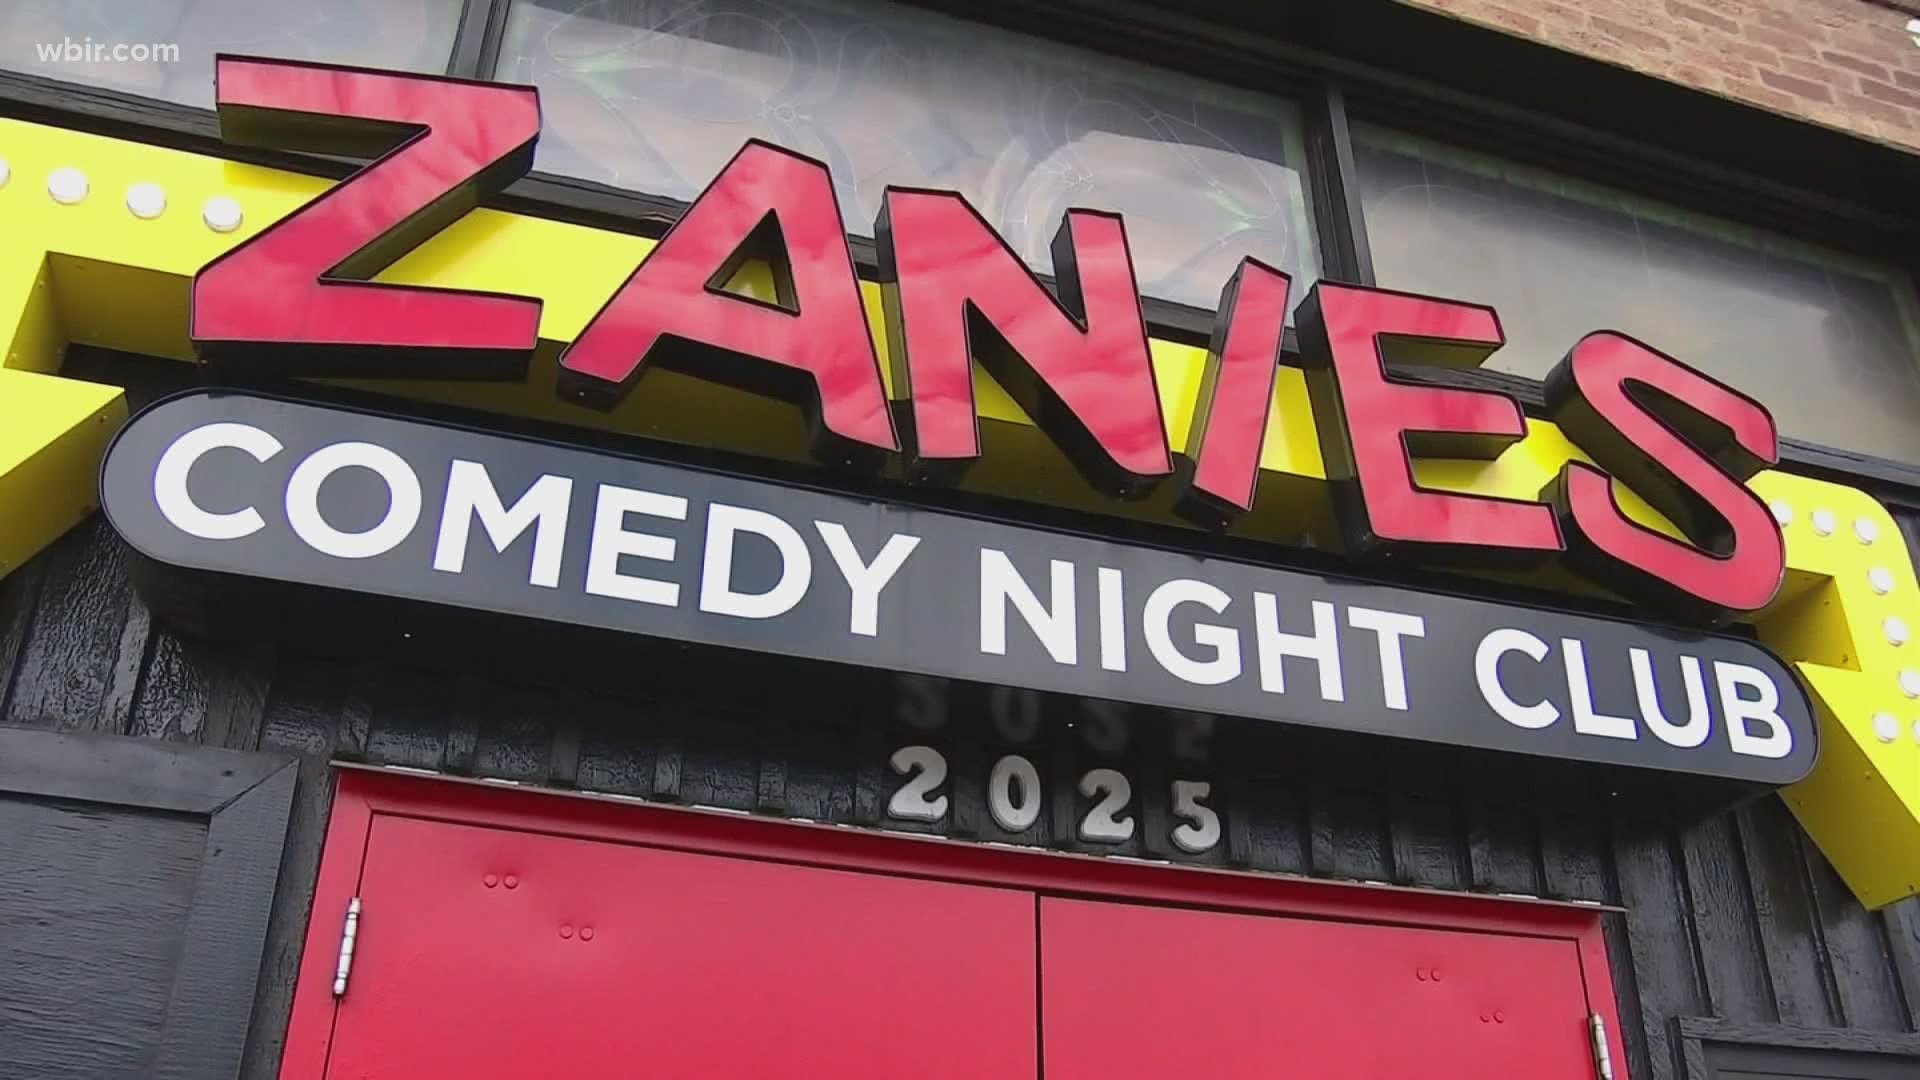 Health leaders in Nashville are urging people who went to a comedy show to get tested for COVID-19 after a comedian tested positive.